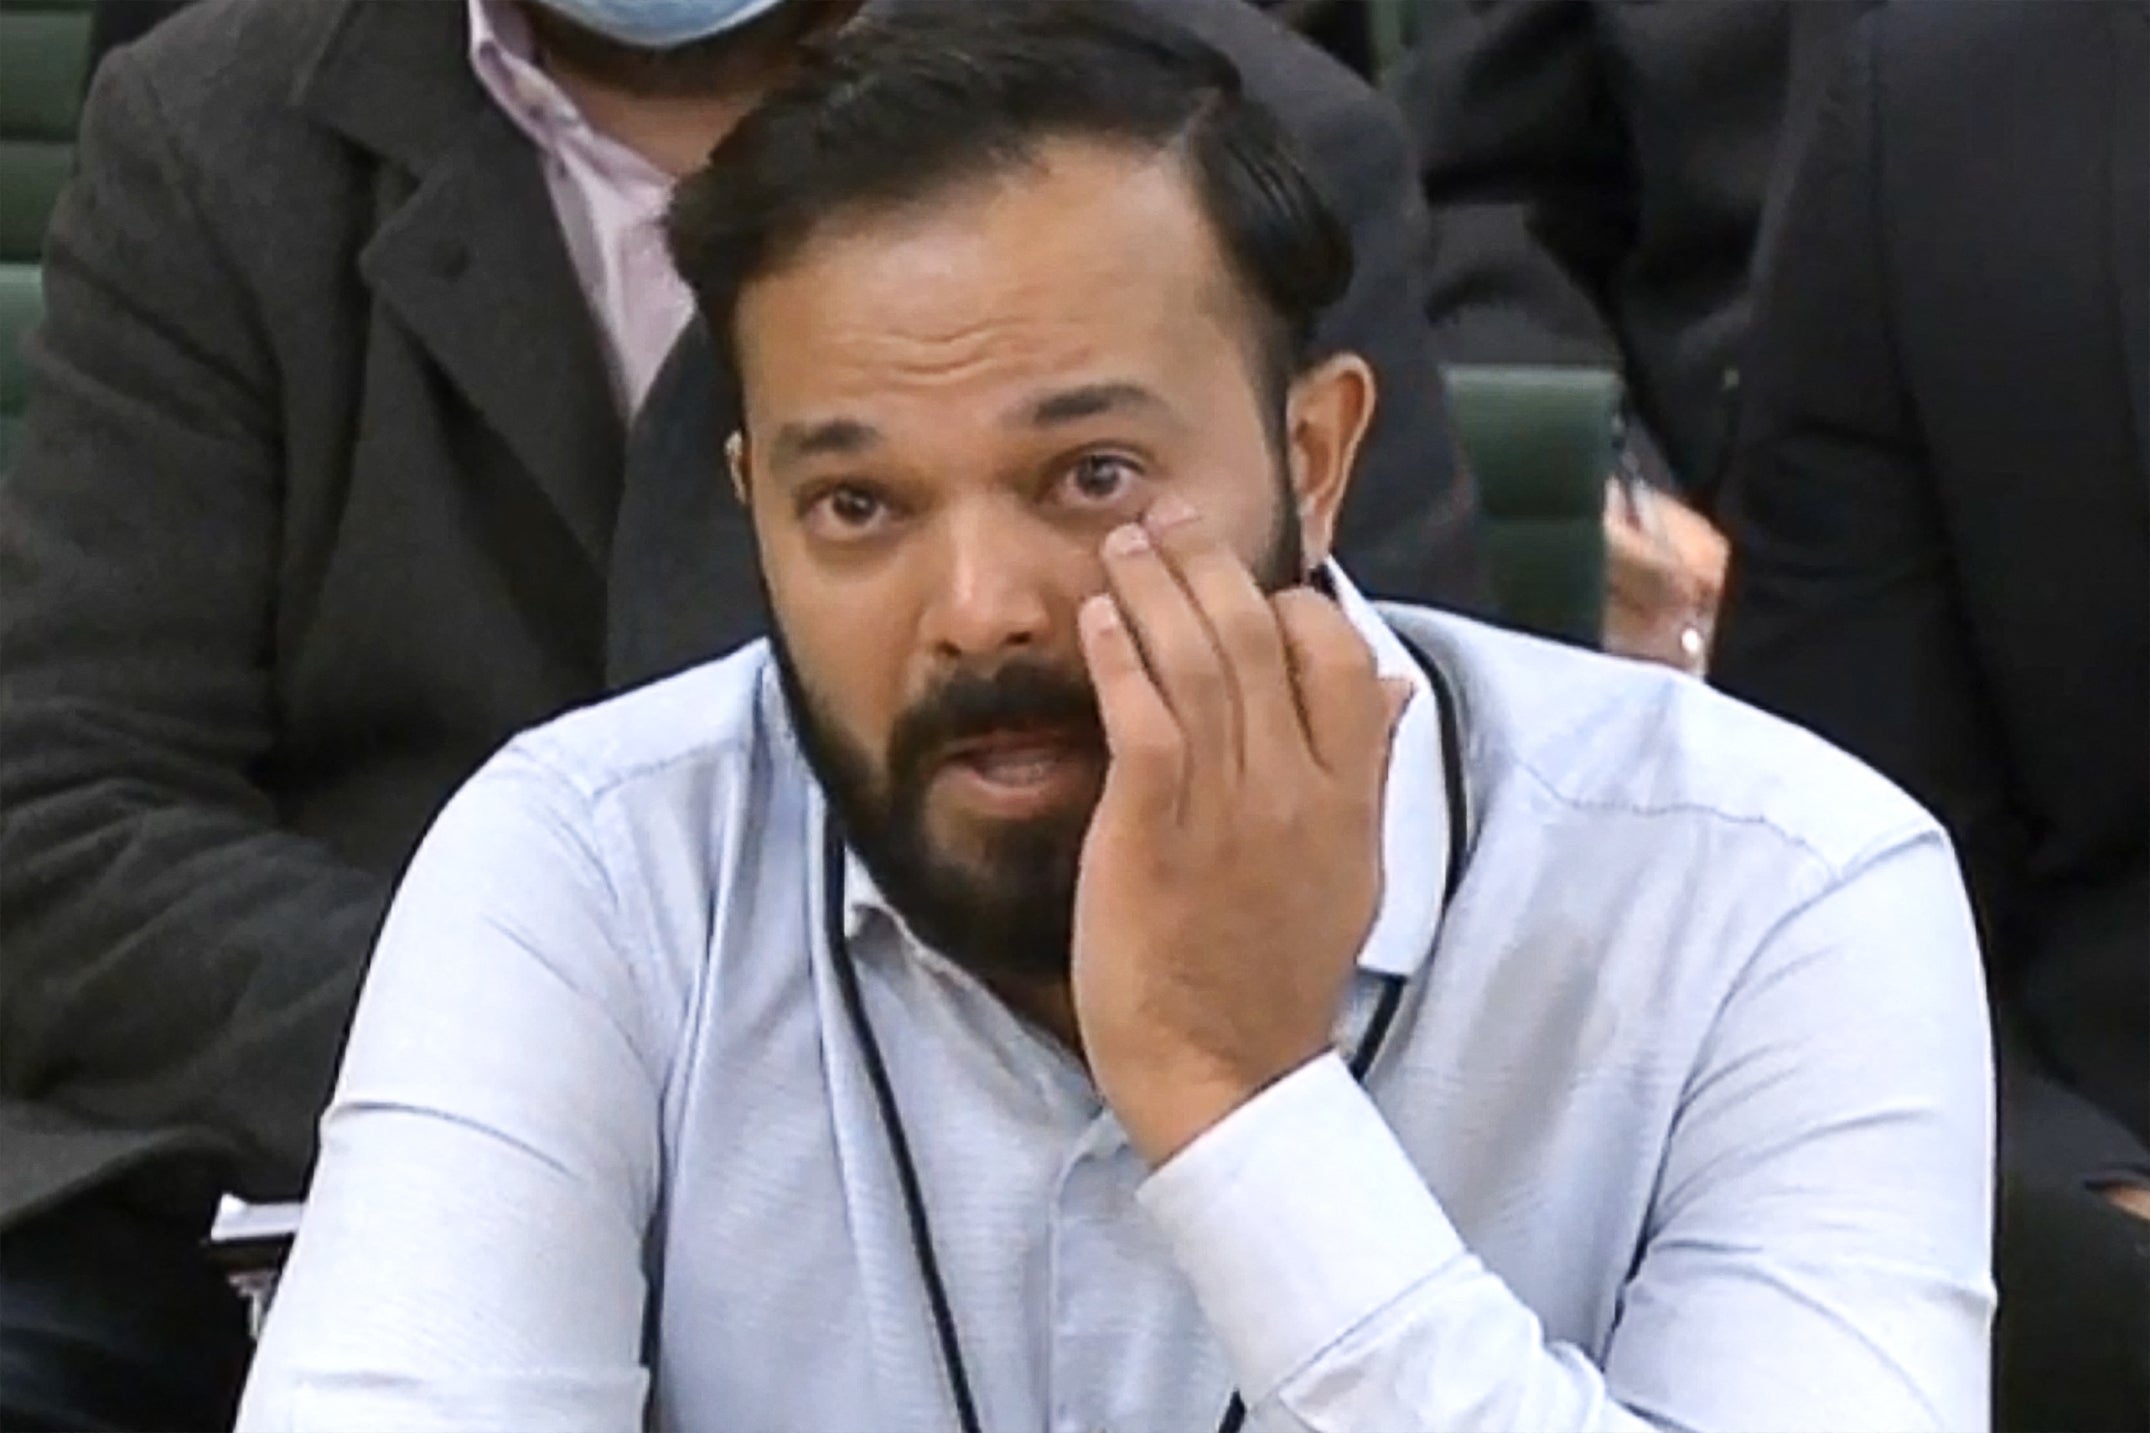 Former Yorkshire cricketer Azeem Rafiq fights back tears while testifying in front of a Digital, Culture, Media and Sport committee in London on Tuesday